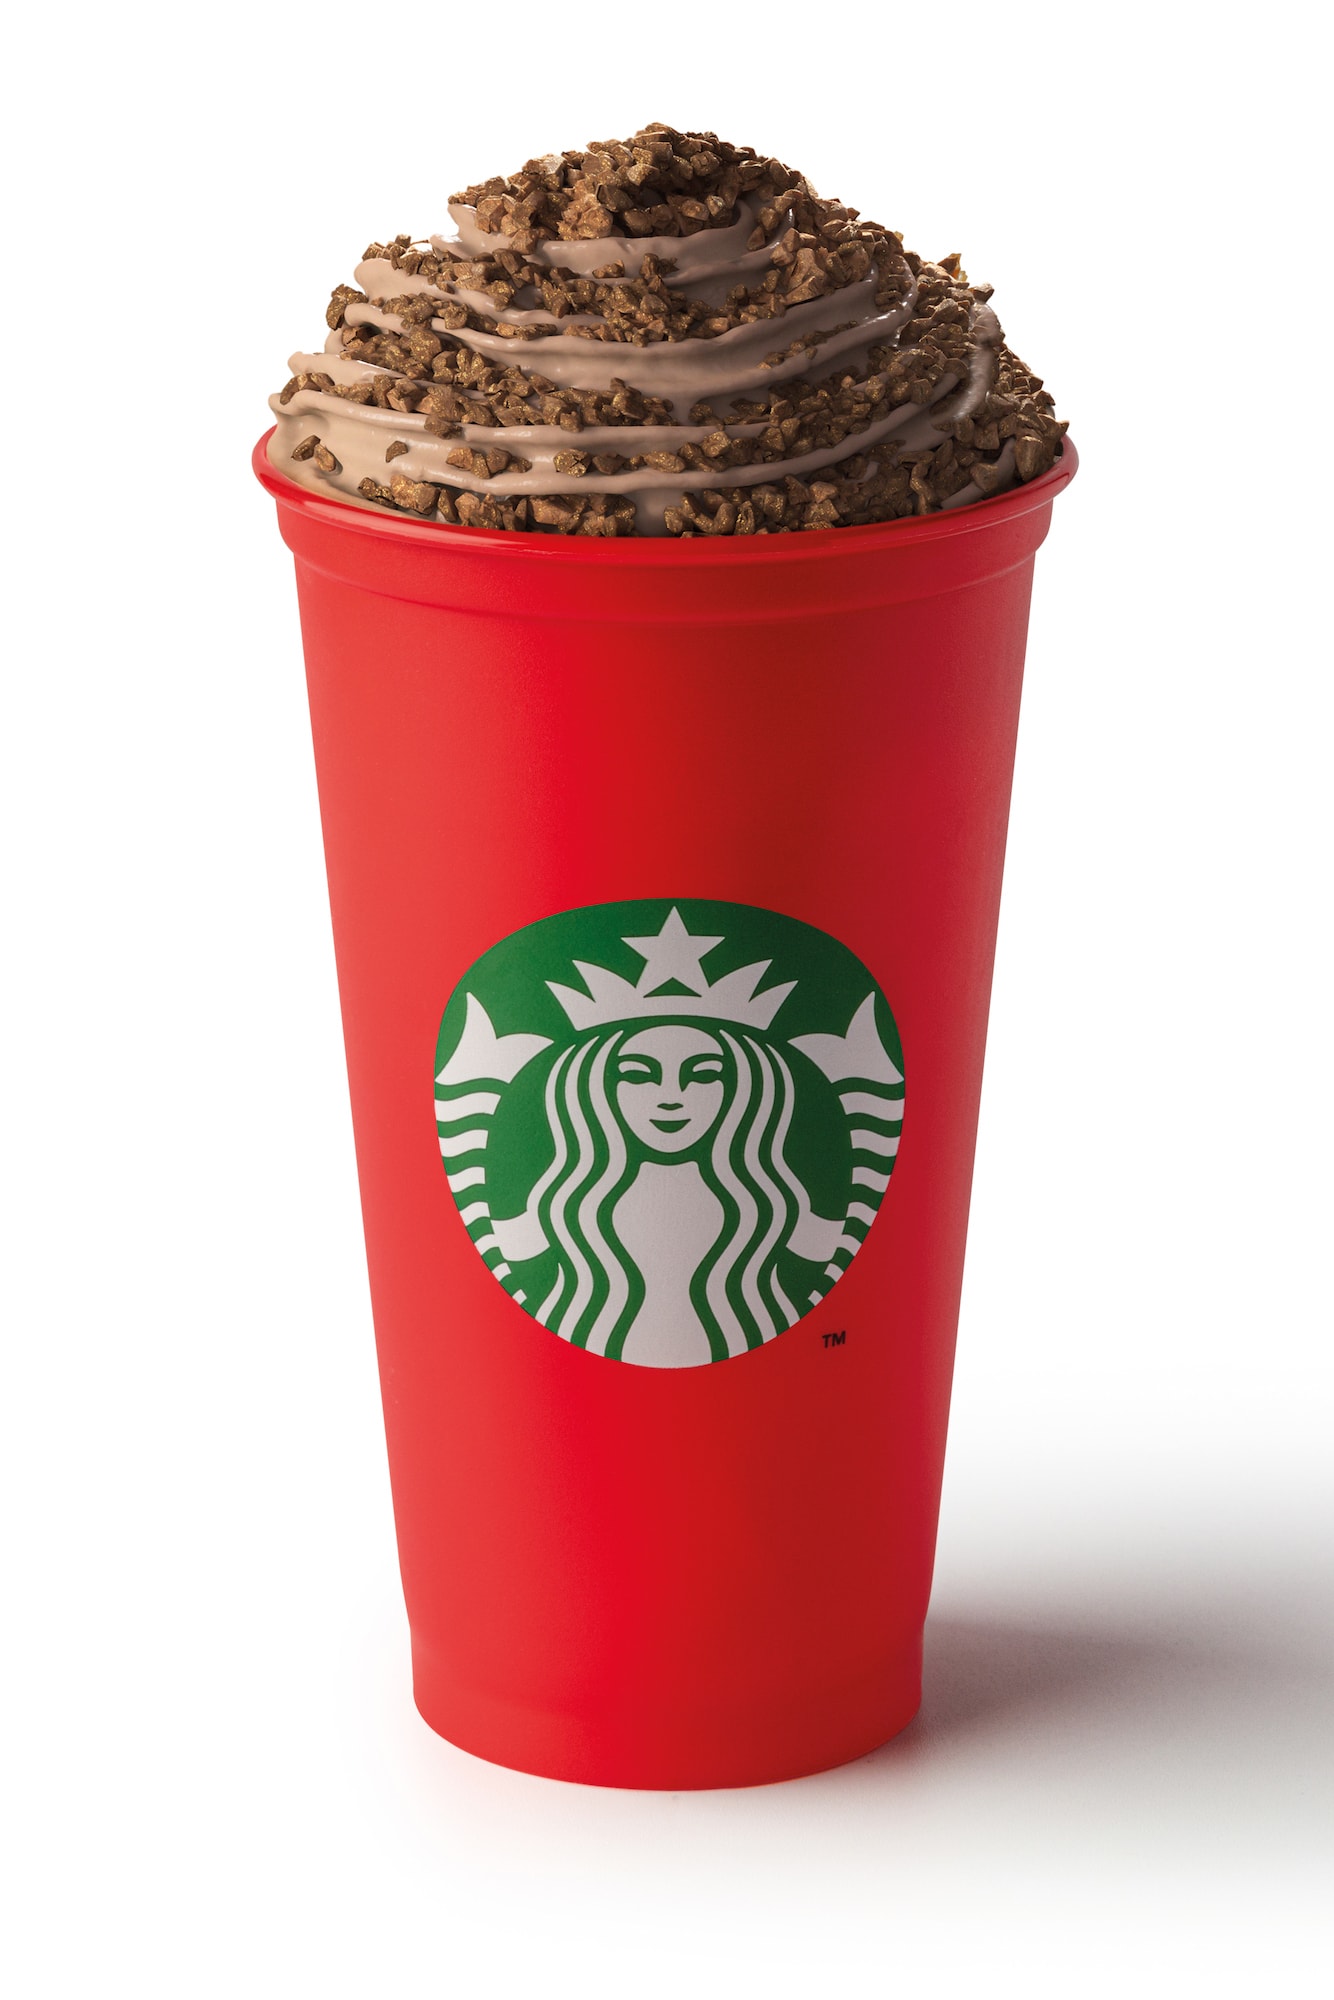 Starbucks Christmas Menu Drinks Eggnogg Toffee Nut Latte Beverages Hot Cold Frappuccino